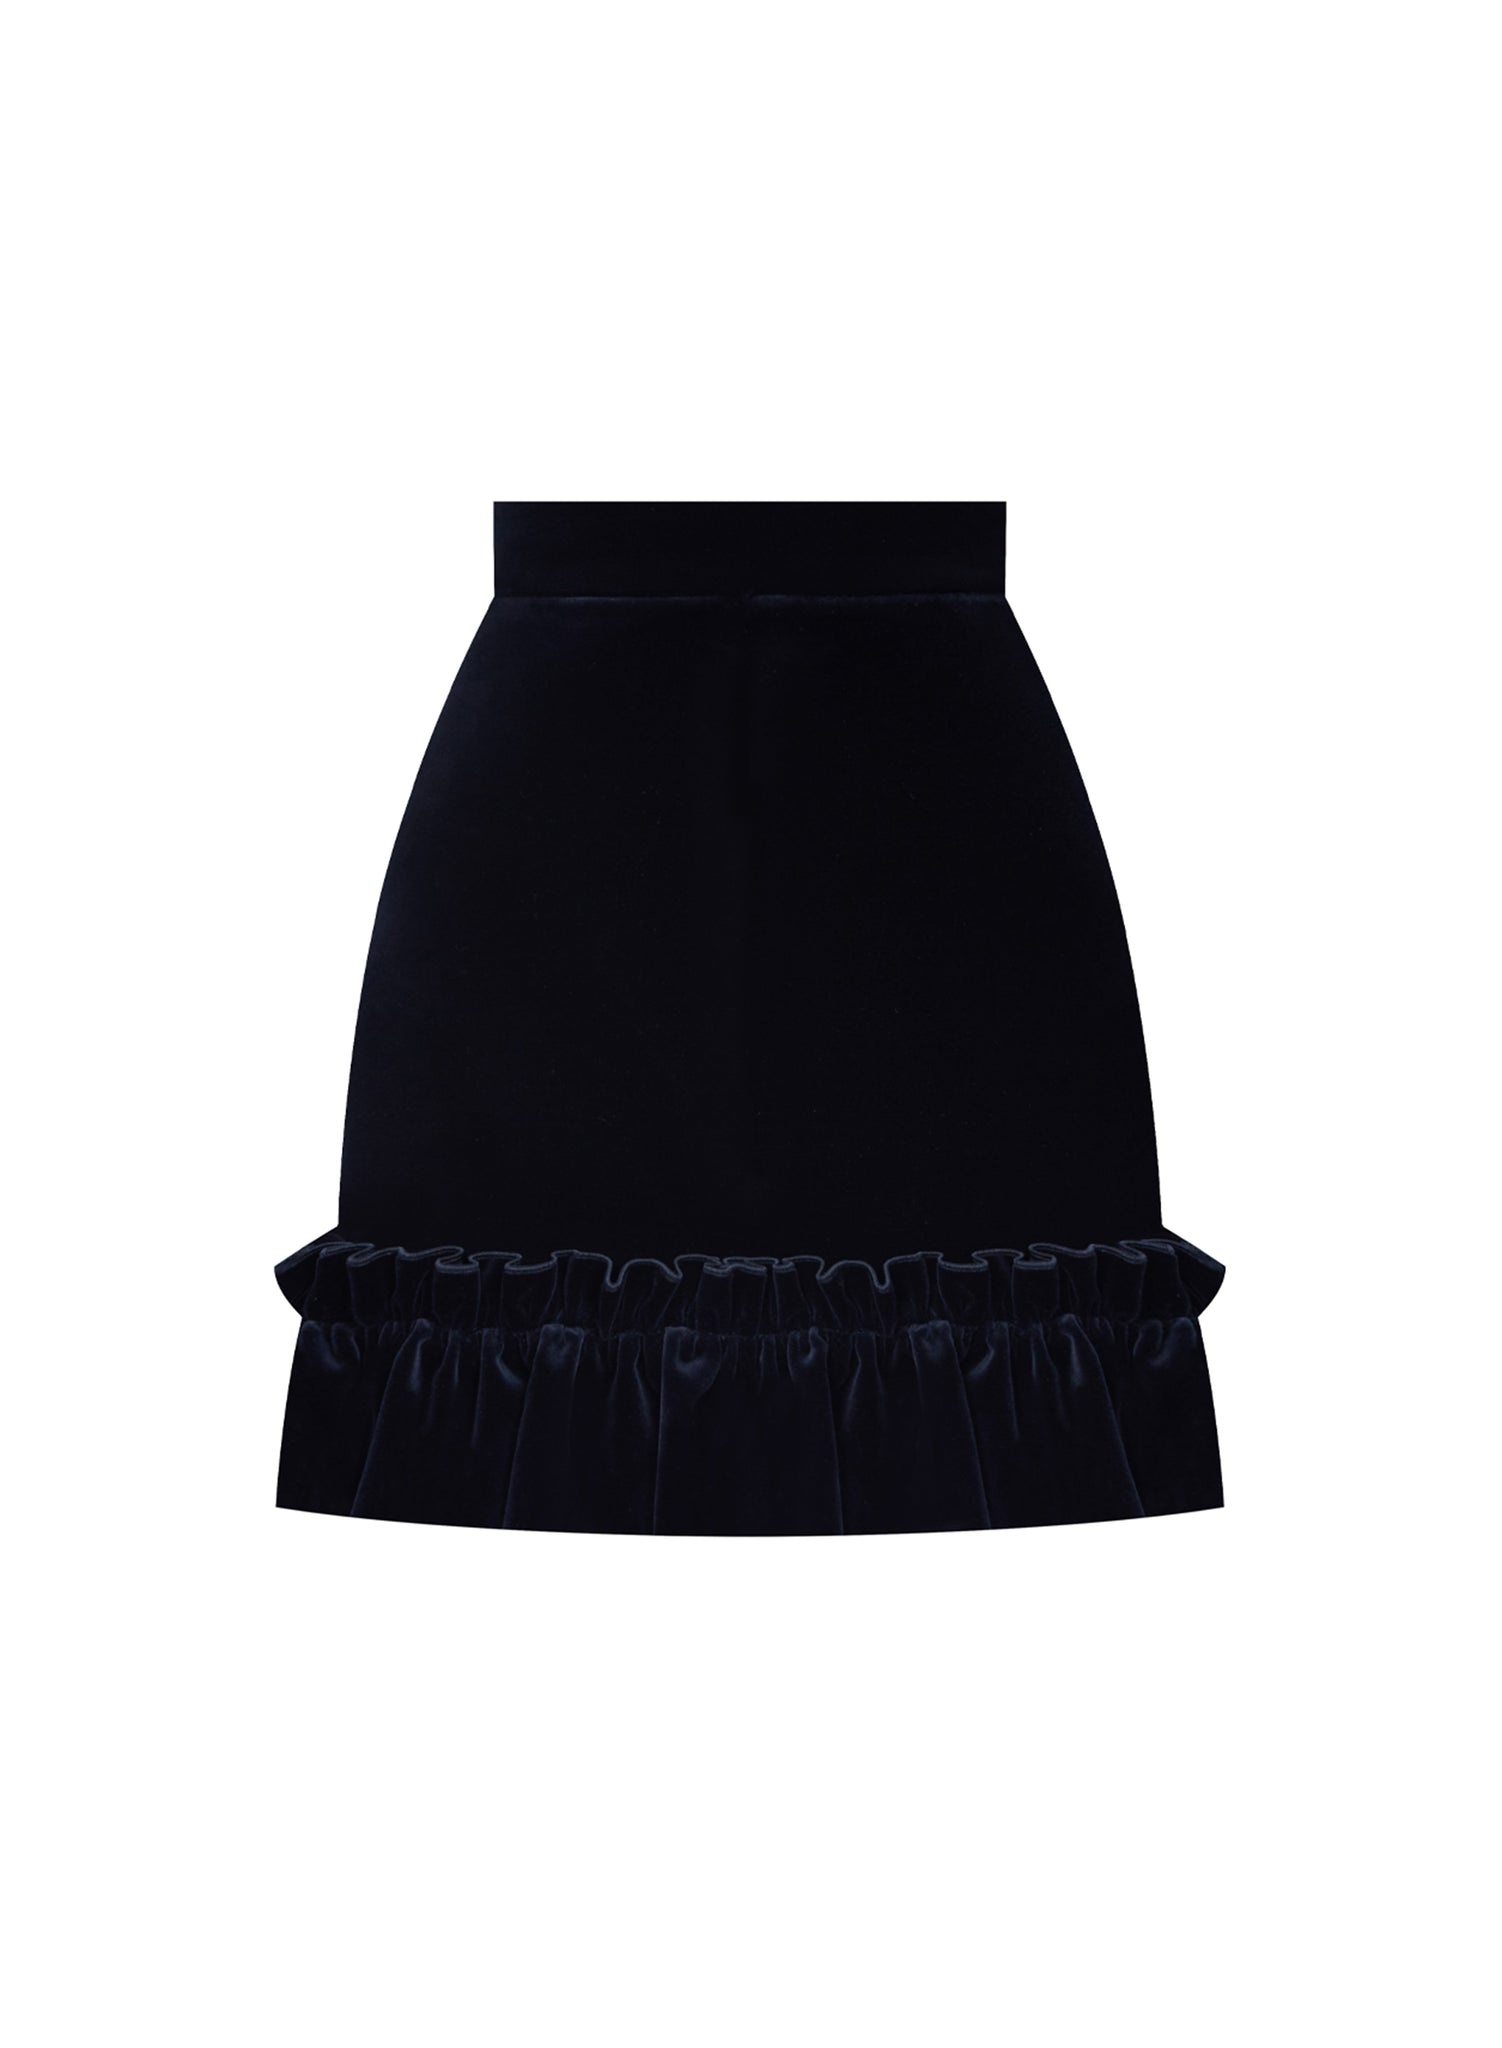 THE NEARLY NUTHIN' SKIRT WITH FRILL - 3